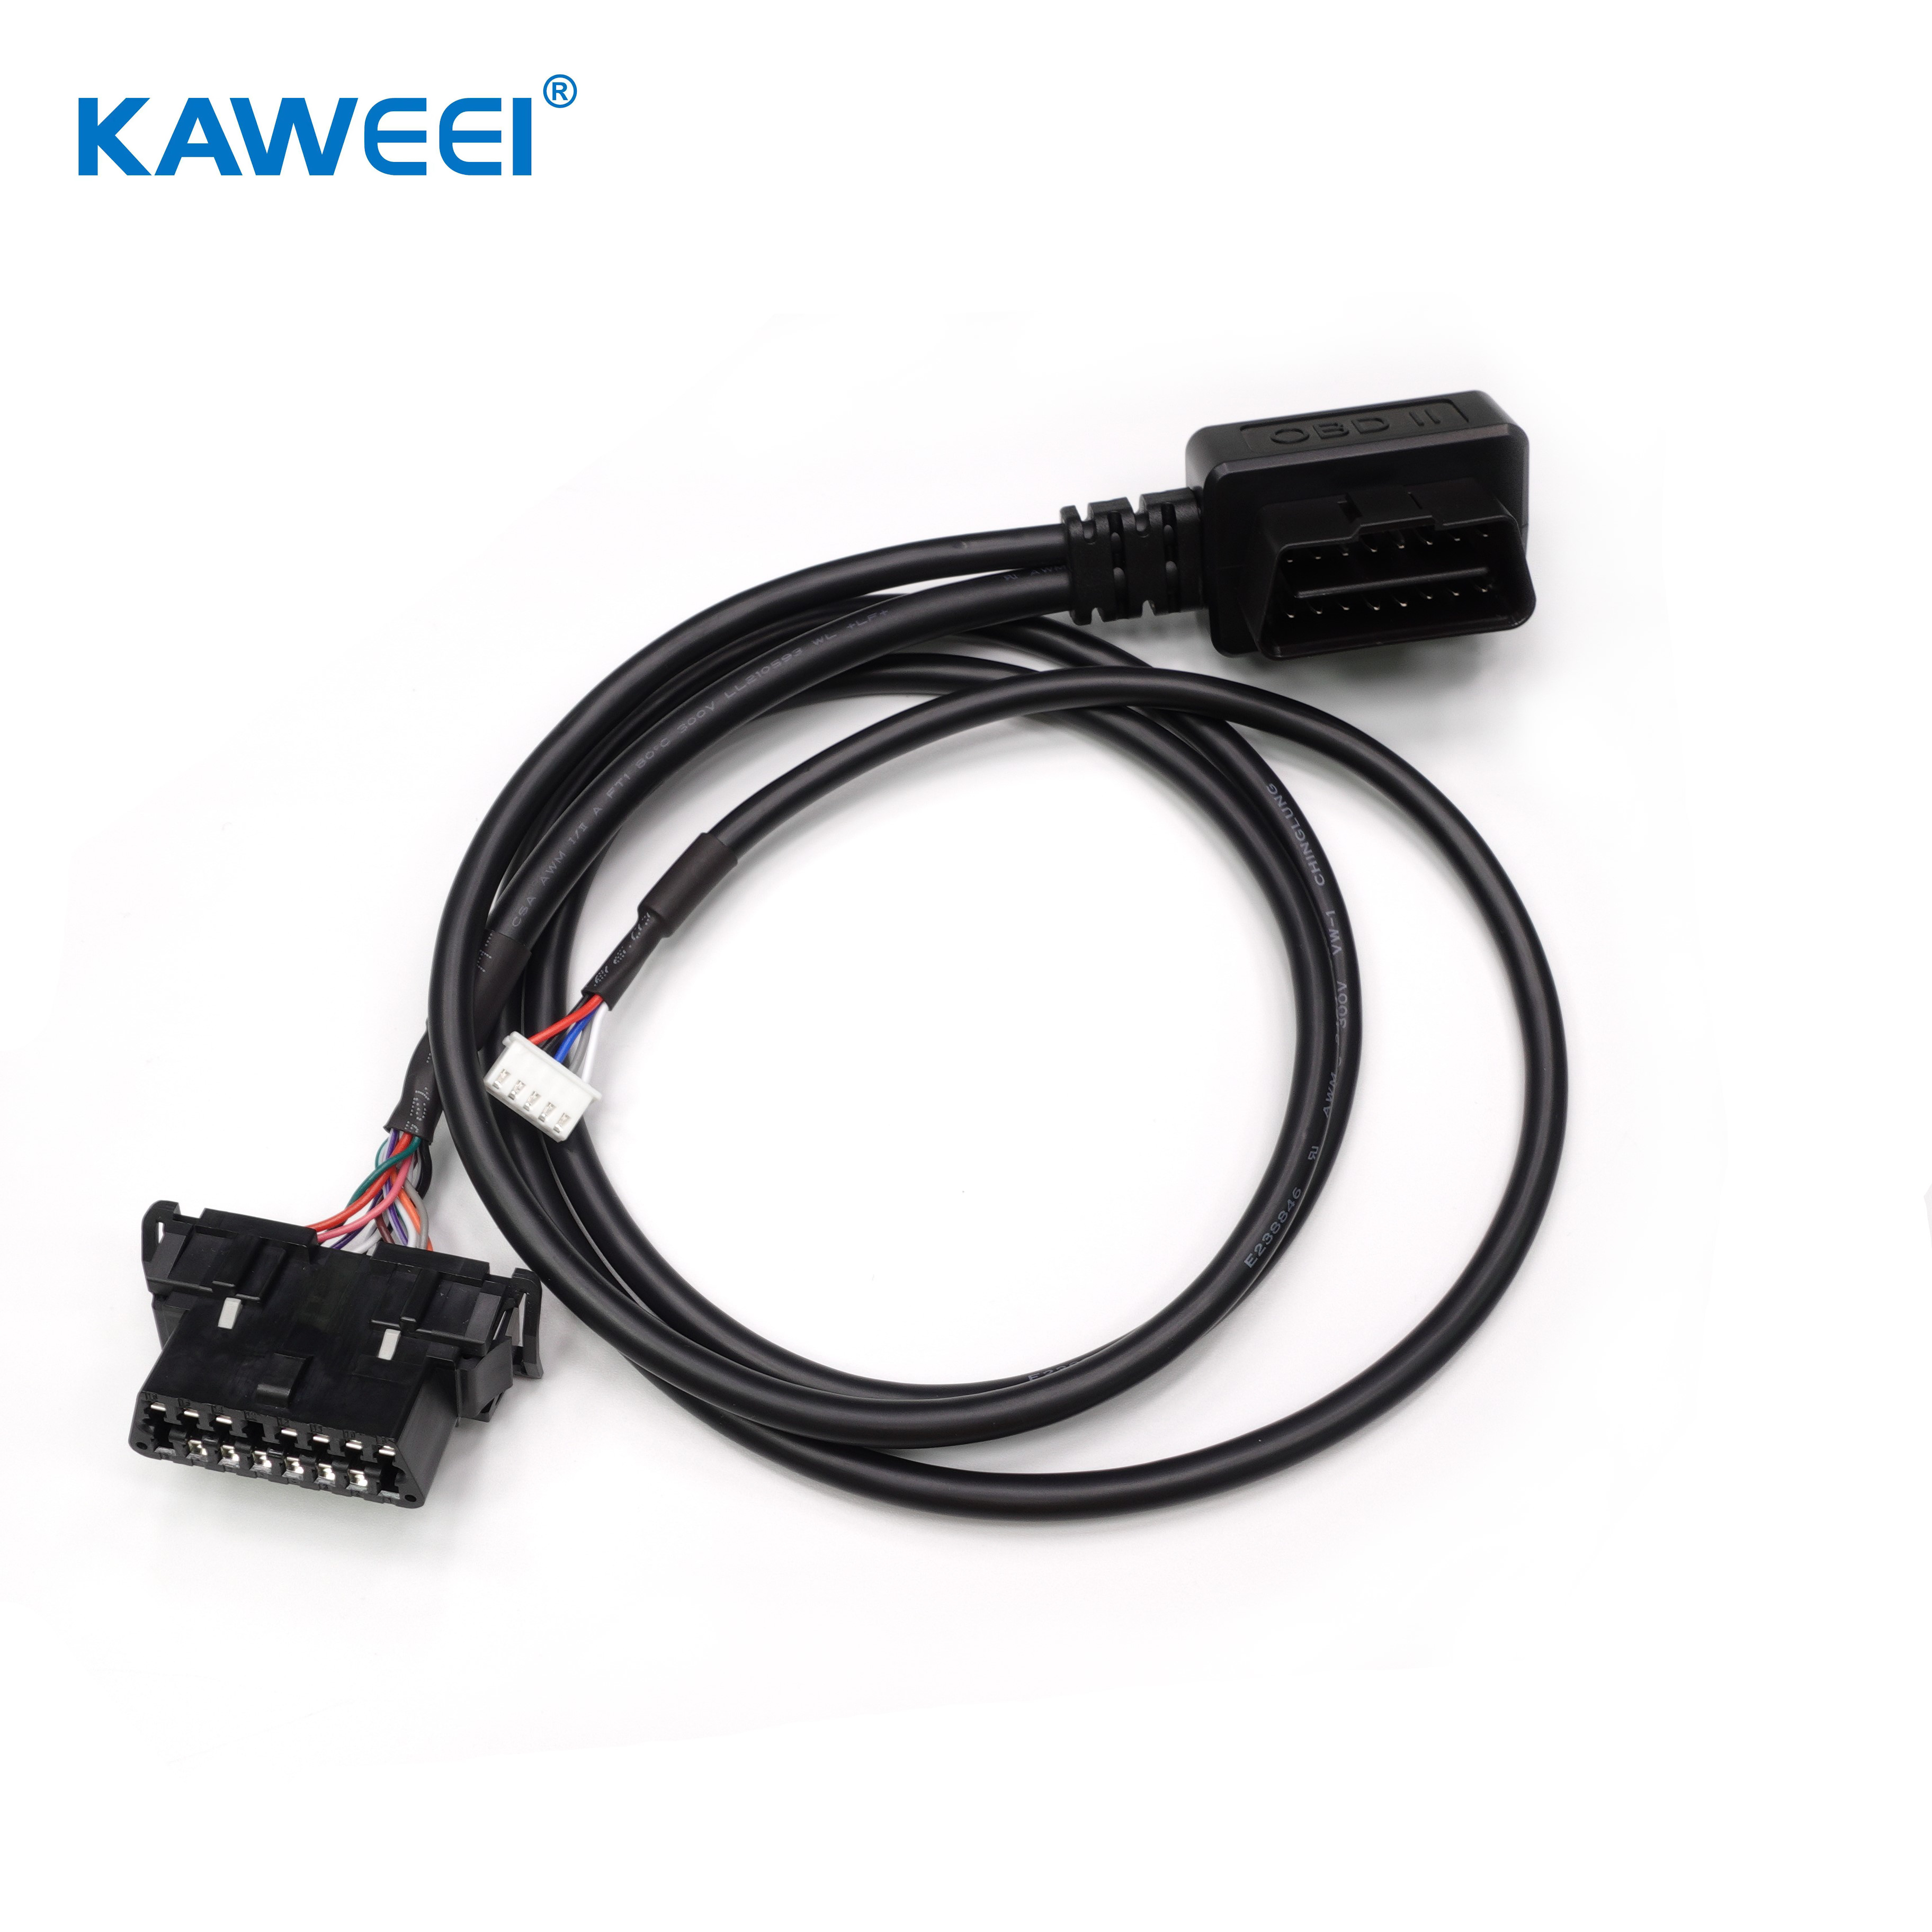  OBD 16P to OBD 16P Housing 5P Connecting Cable Vehicle Instrument Machine